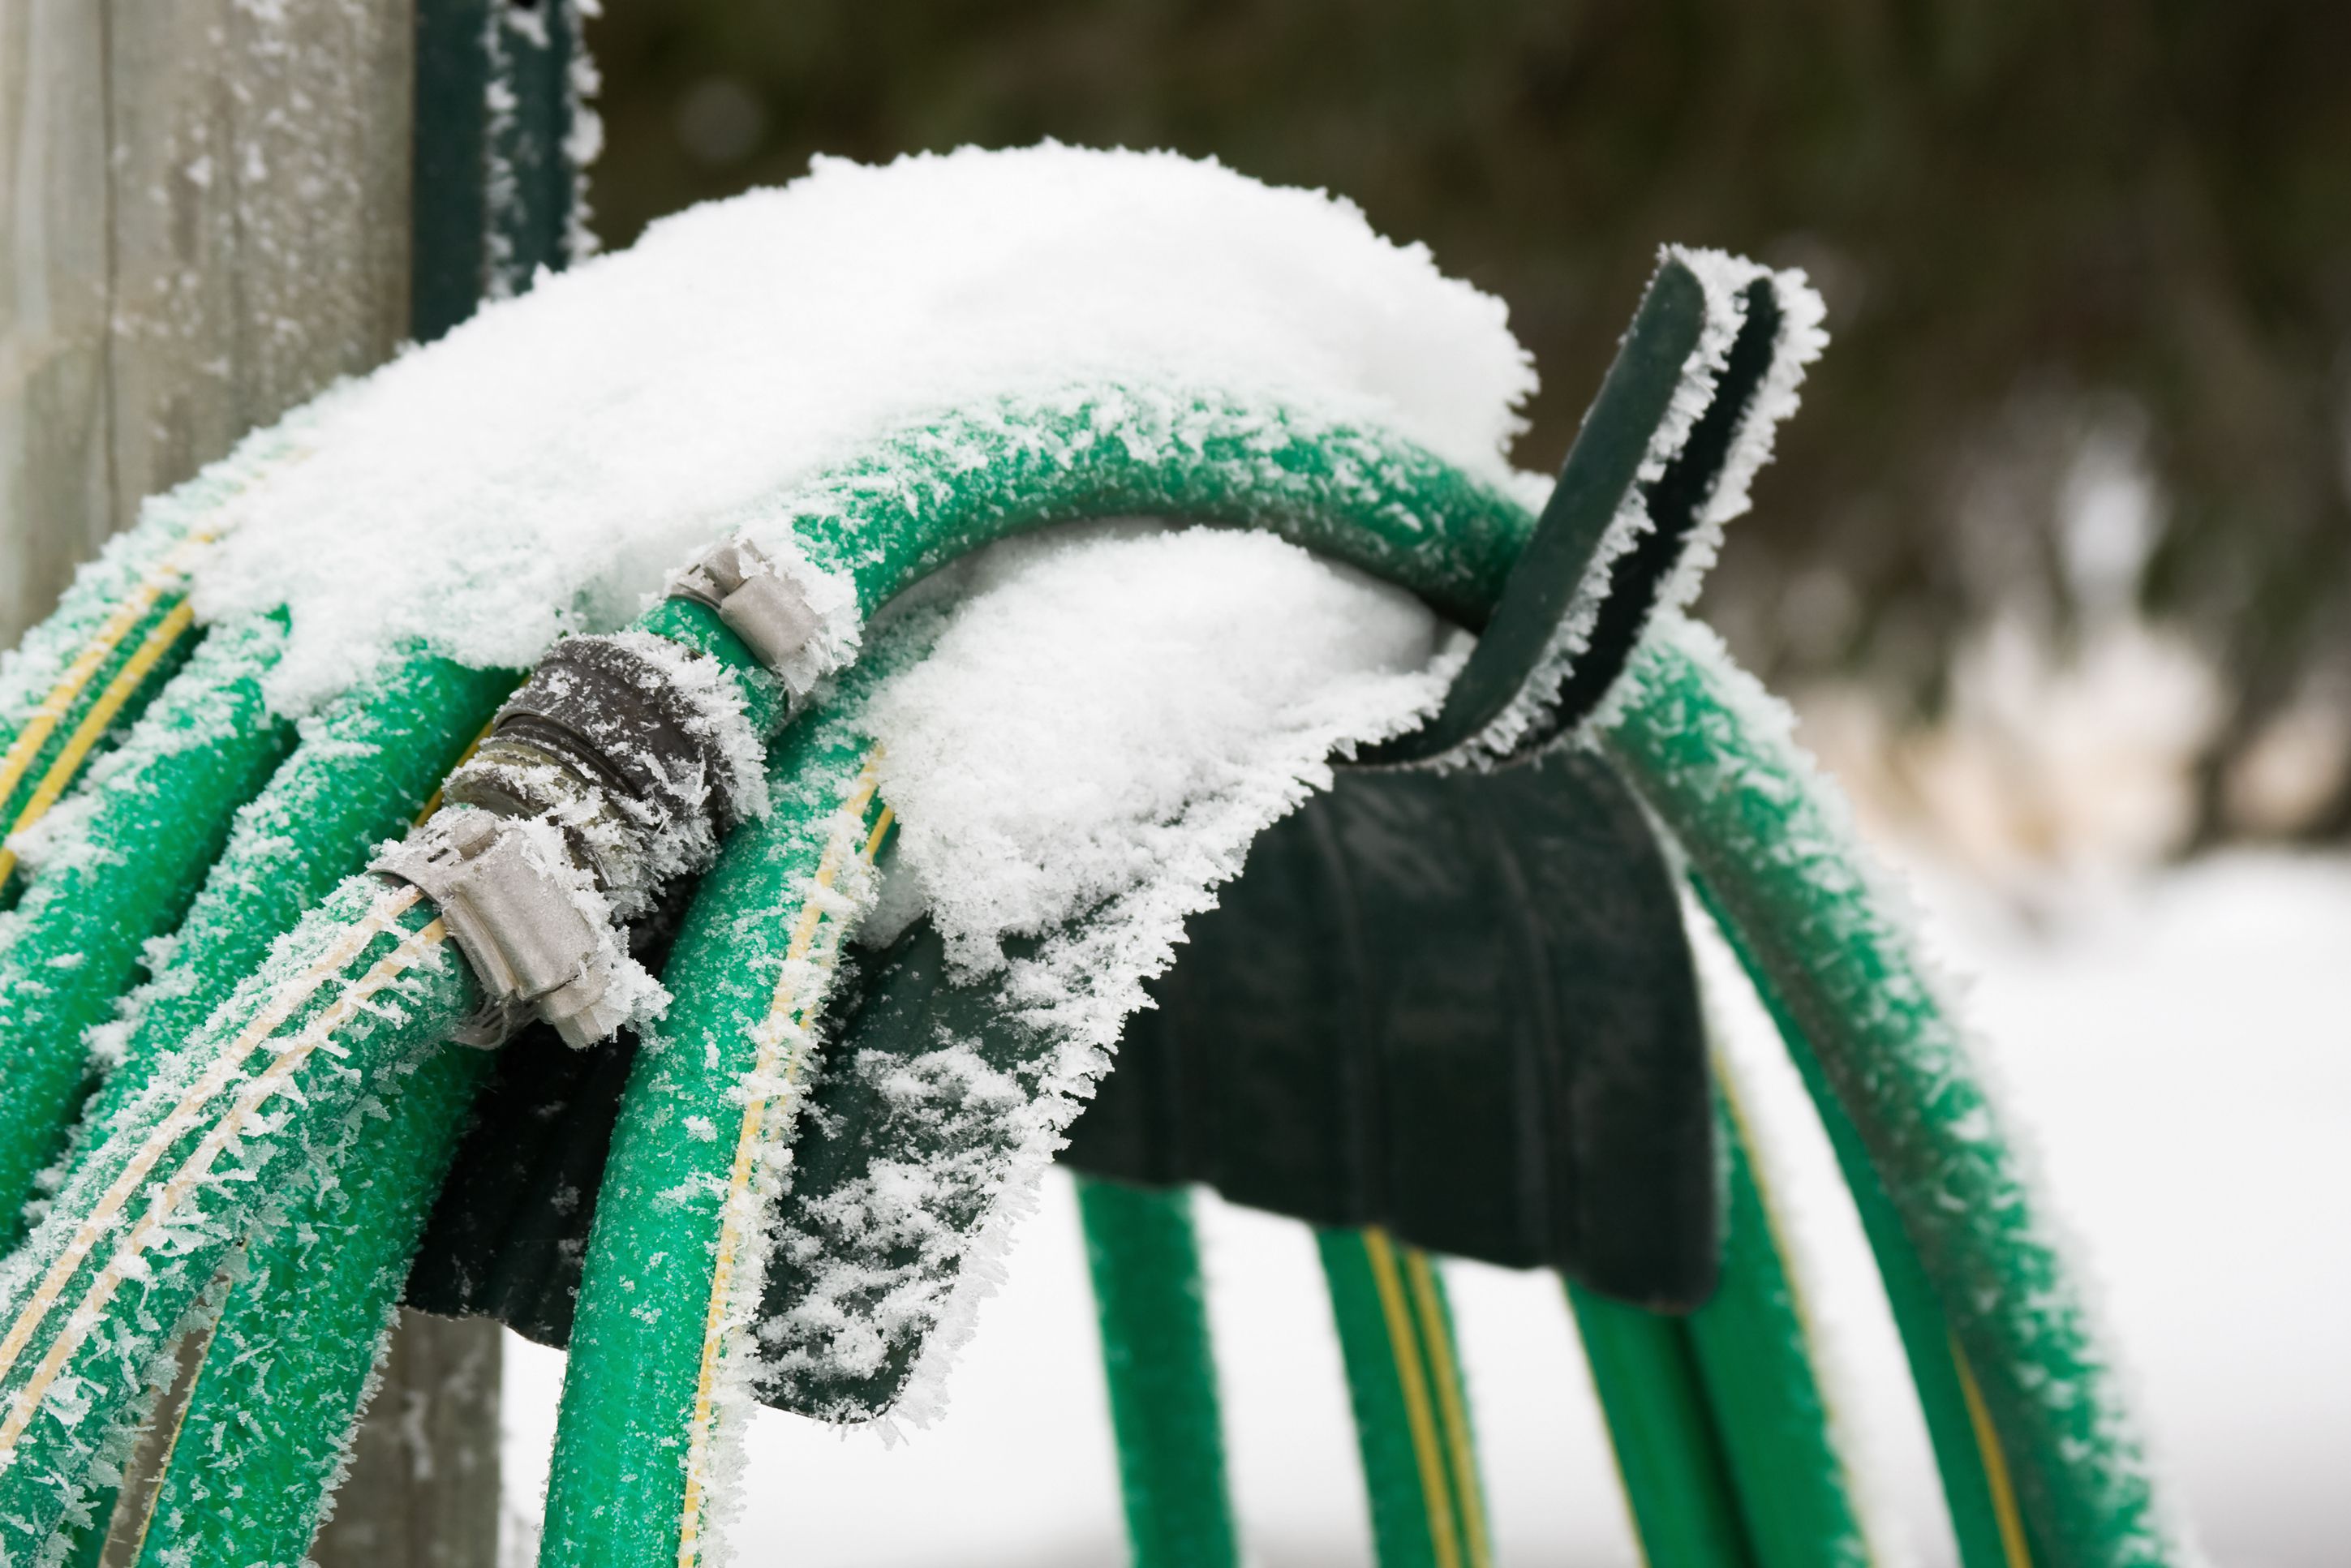 Tips to Help Winterize Your Home by Kedish Realty Group 